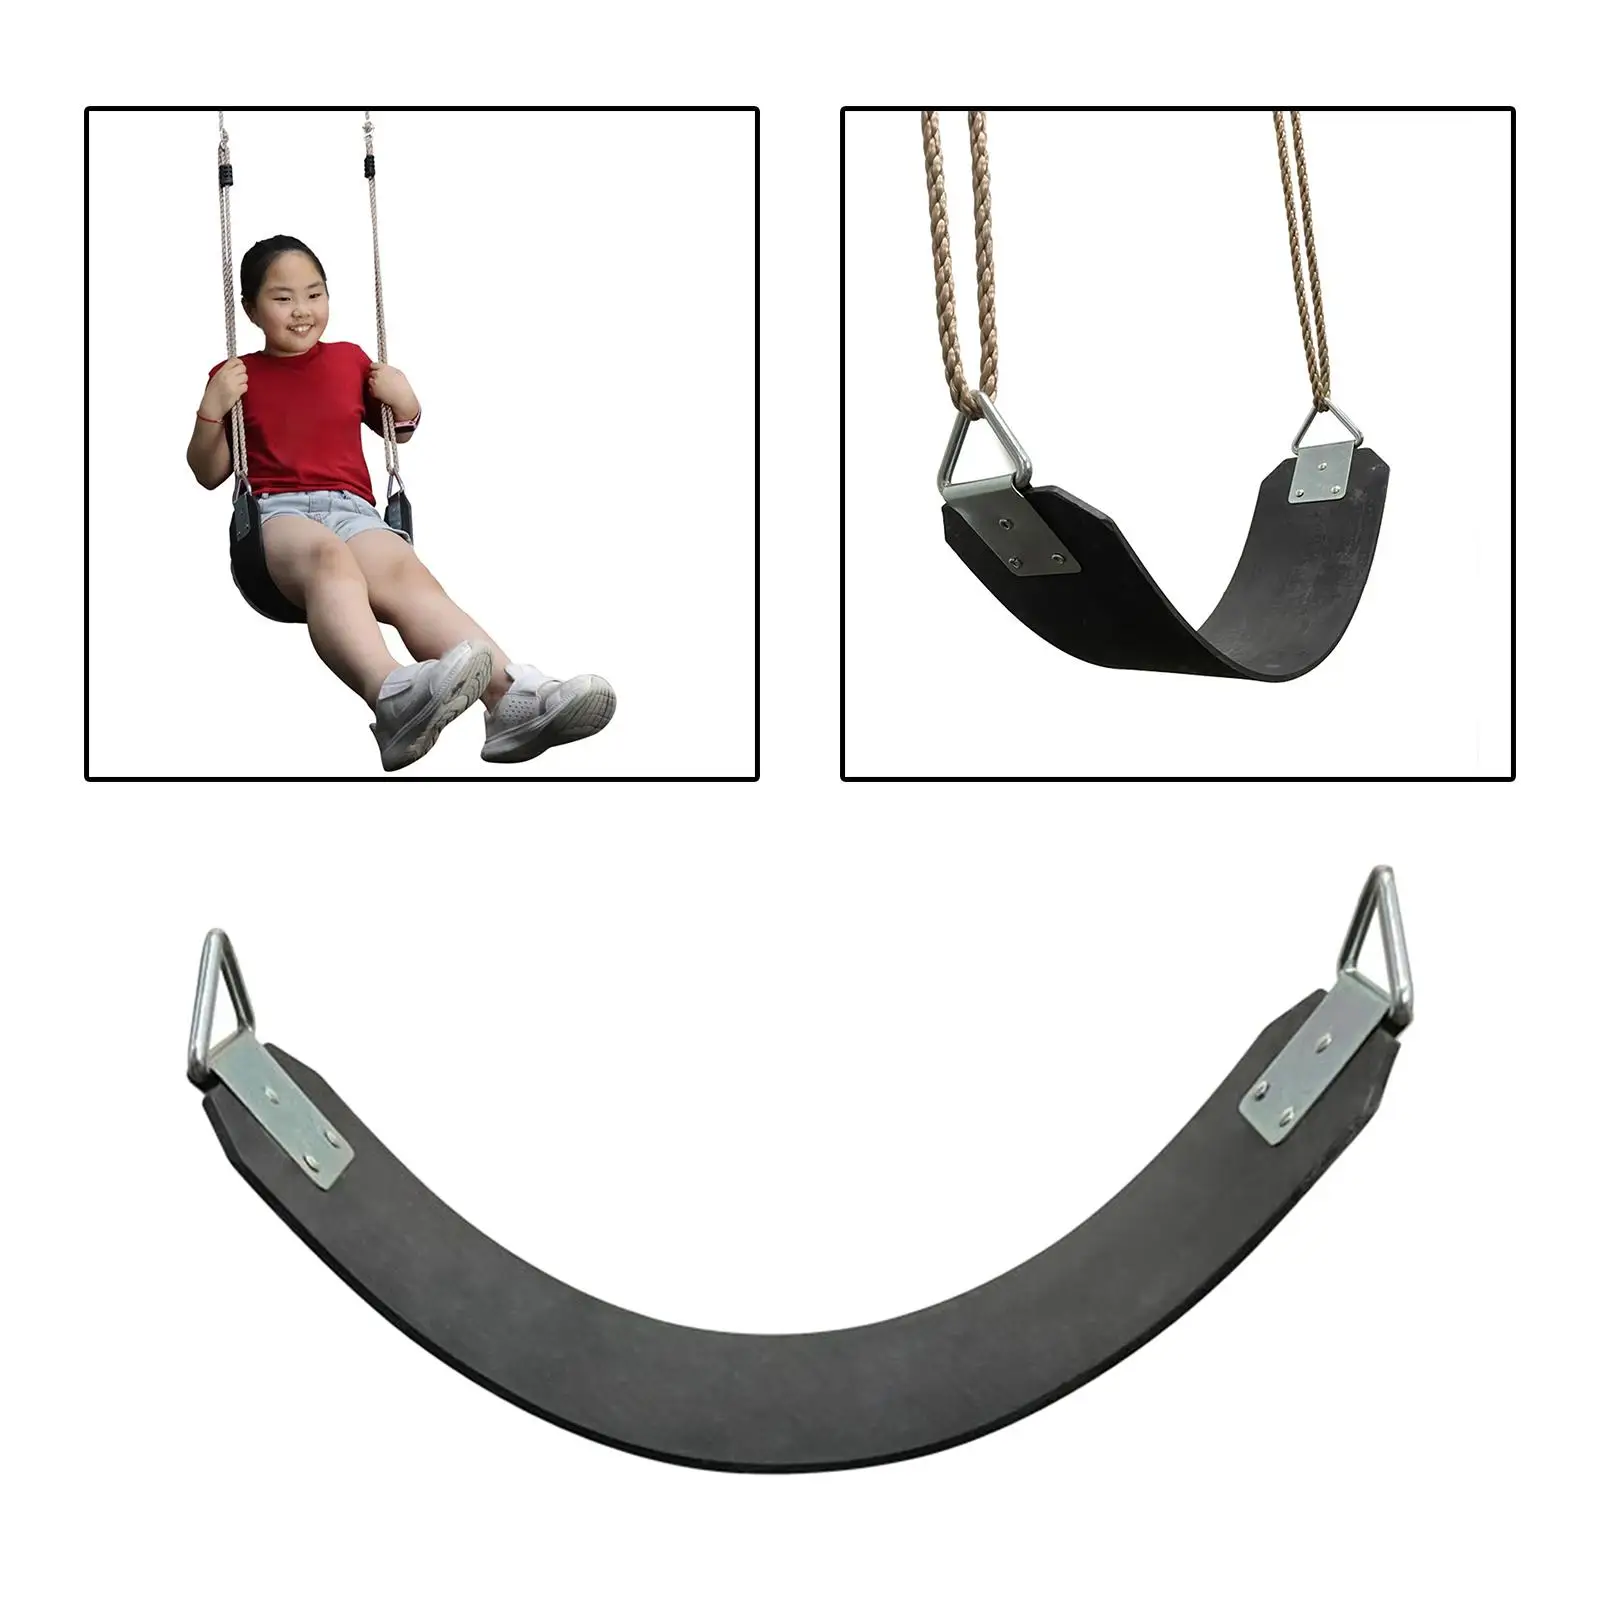 Replacement Swing Seat Garden Swings with Metal Triangle Rings Hanging Swing for Garden Backyard Gym